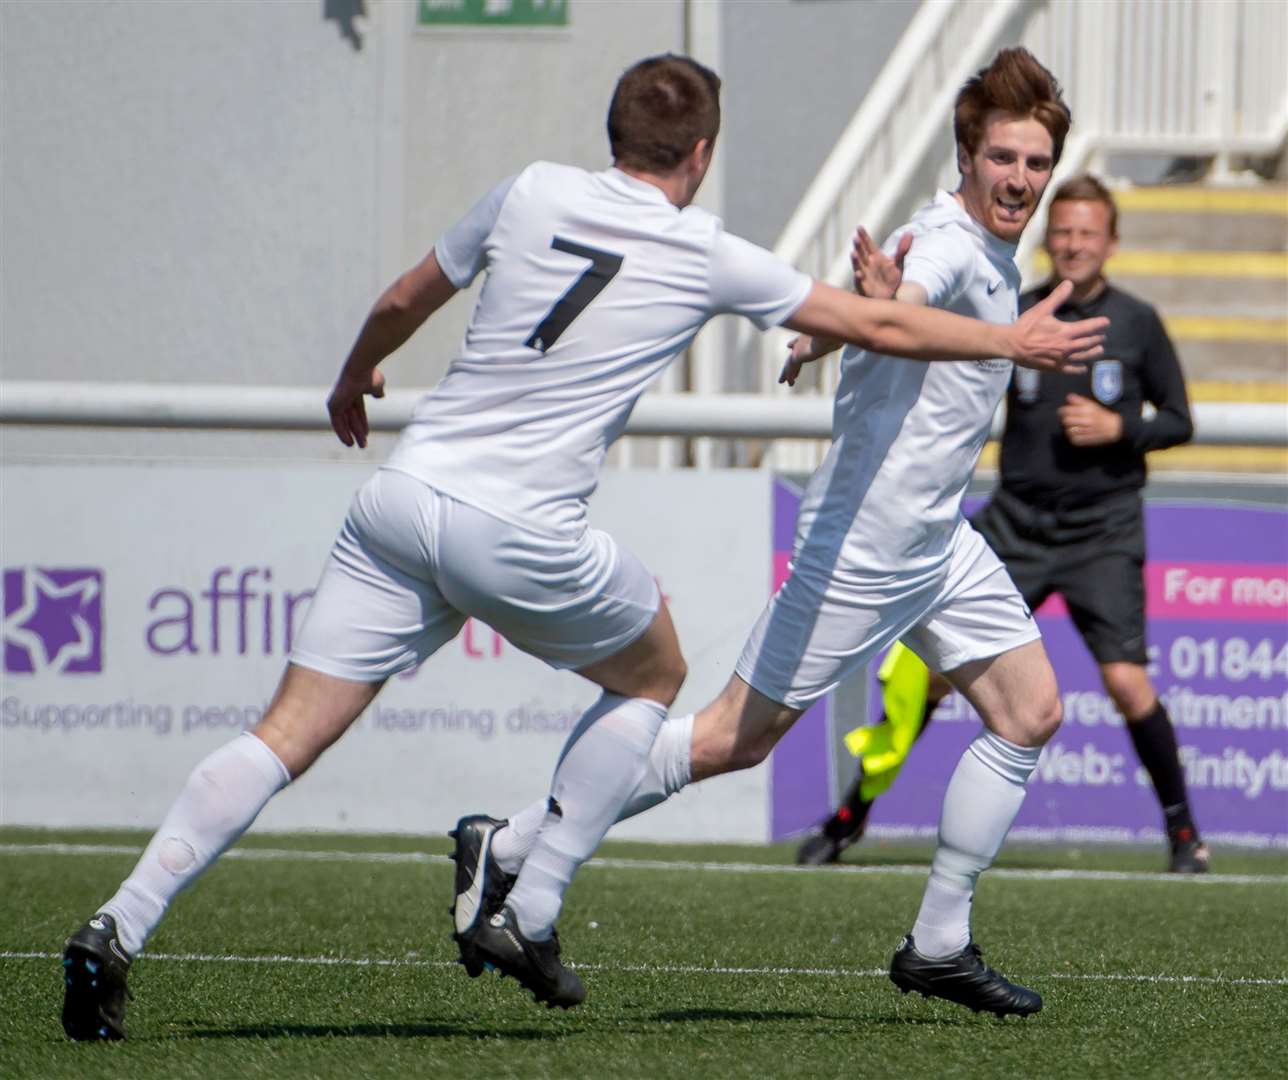 Matt Martin celebrates scoring the opener for Littlebourne in the DFDS Junior Cup A Final. Picture: Ian Scammell/PSP Images